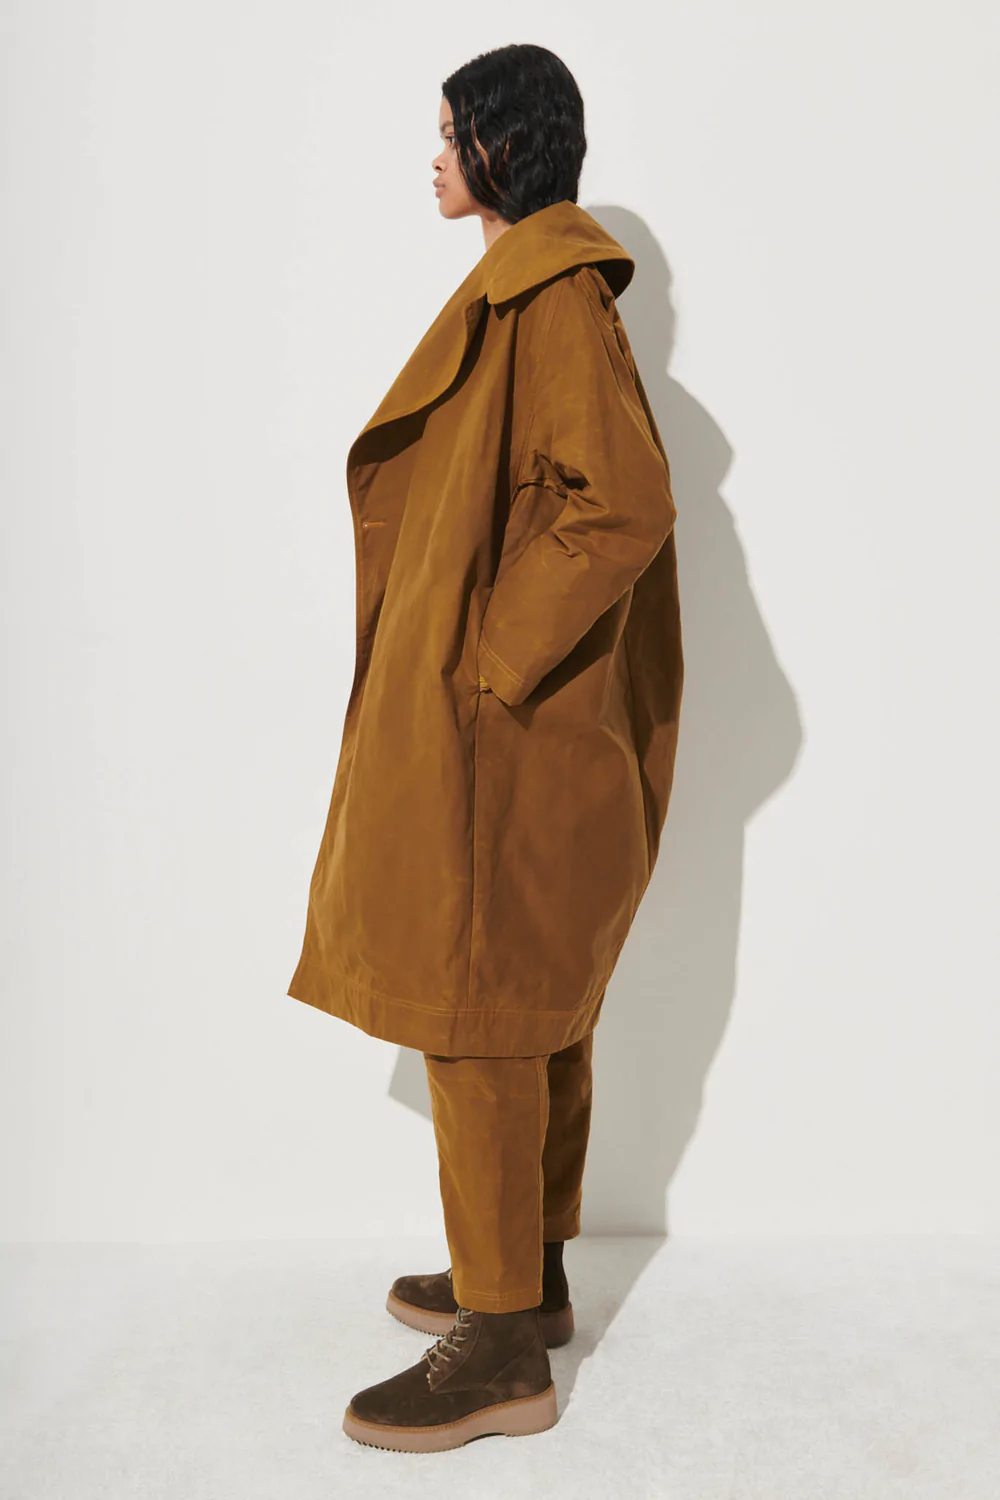 Product Image for Release Coat, Brown